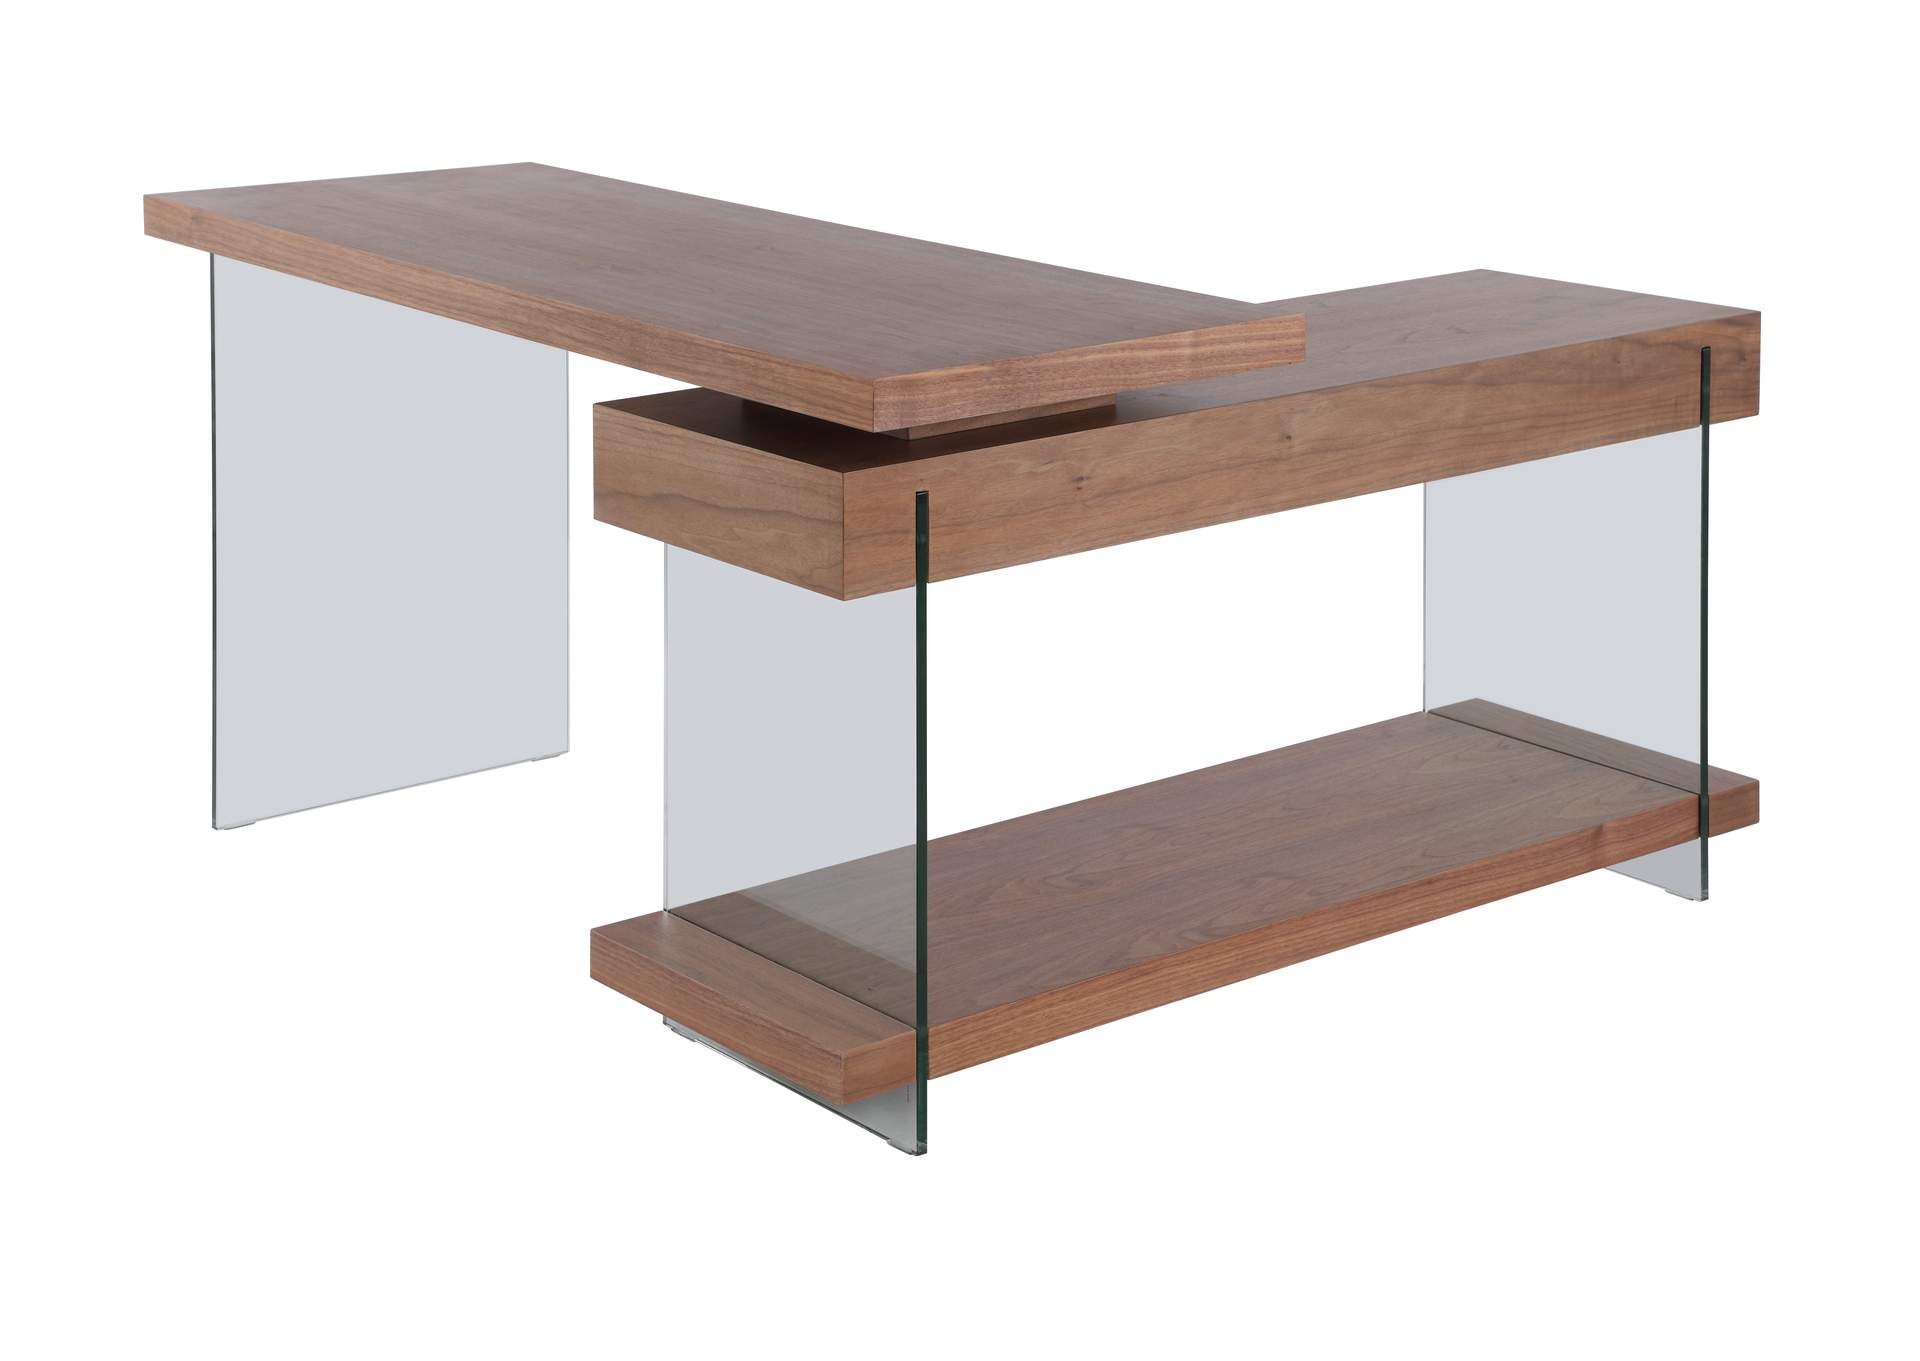 Modern Rotatable Glass & Wooden Desk w/ Drawers & Shelf,Chintaly Imports